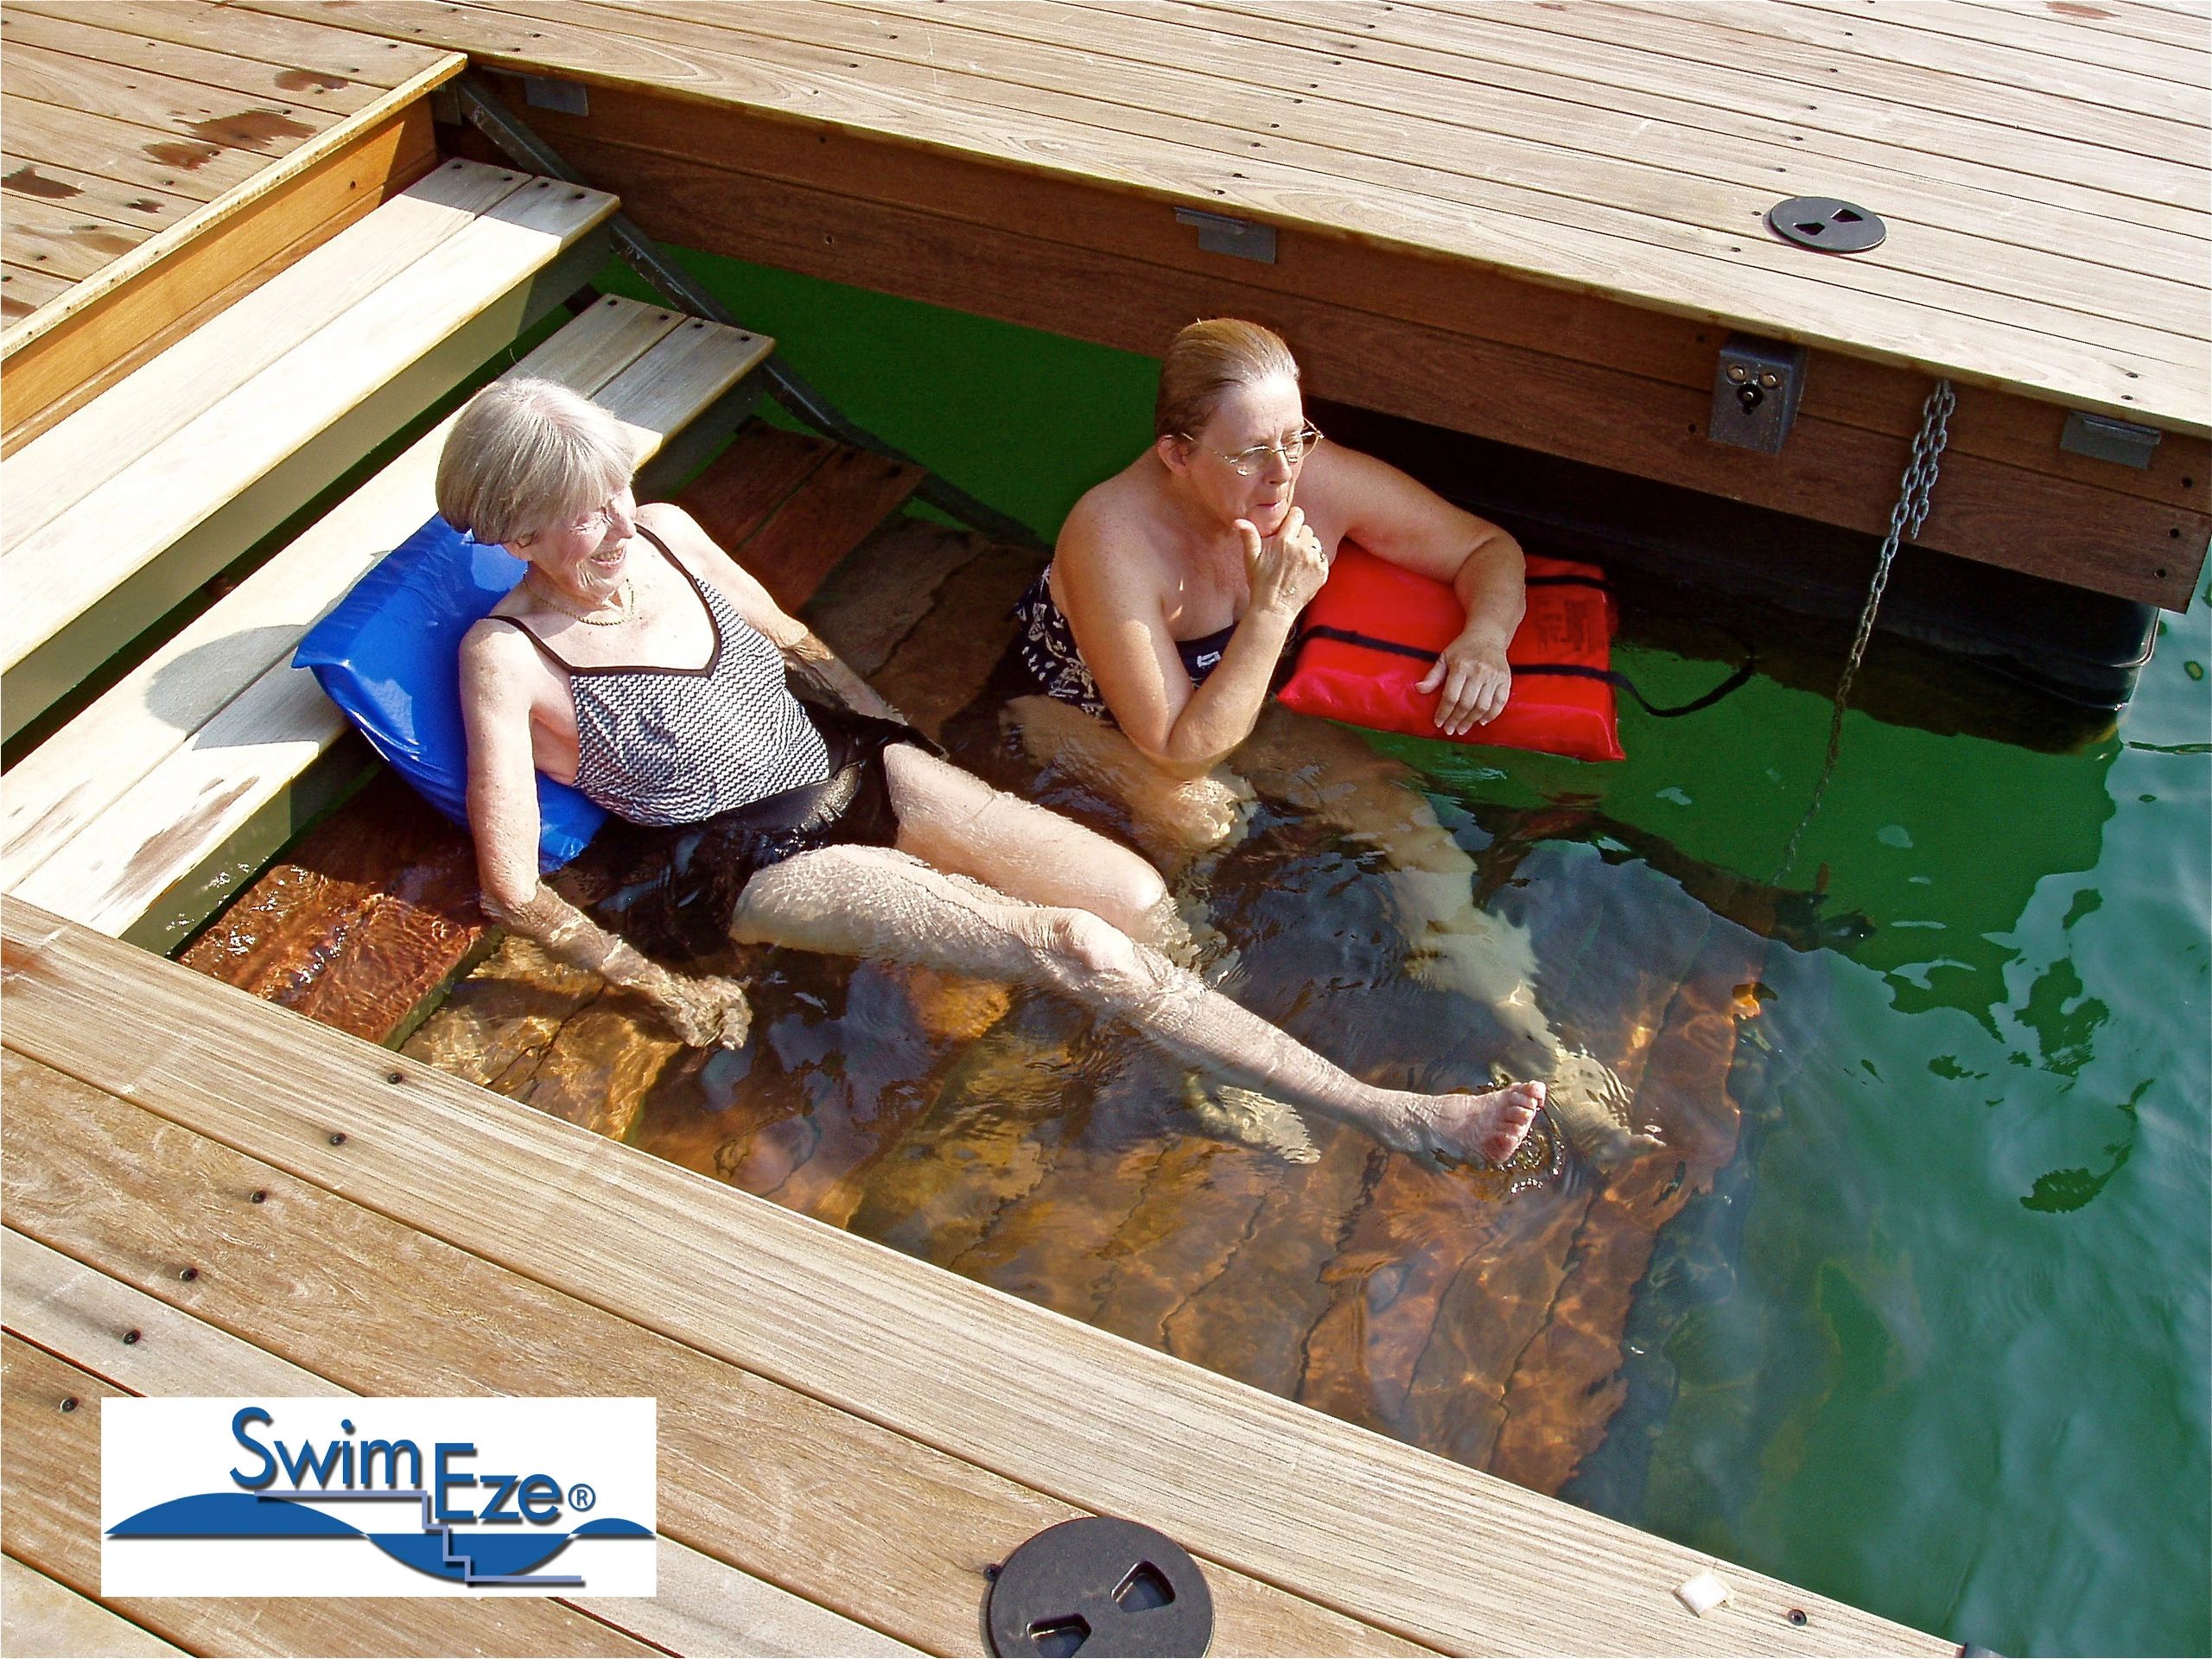 Launch Platform, which serves as a versatile resting area for water enthusiasts.